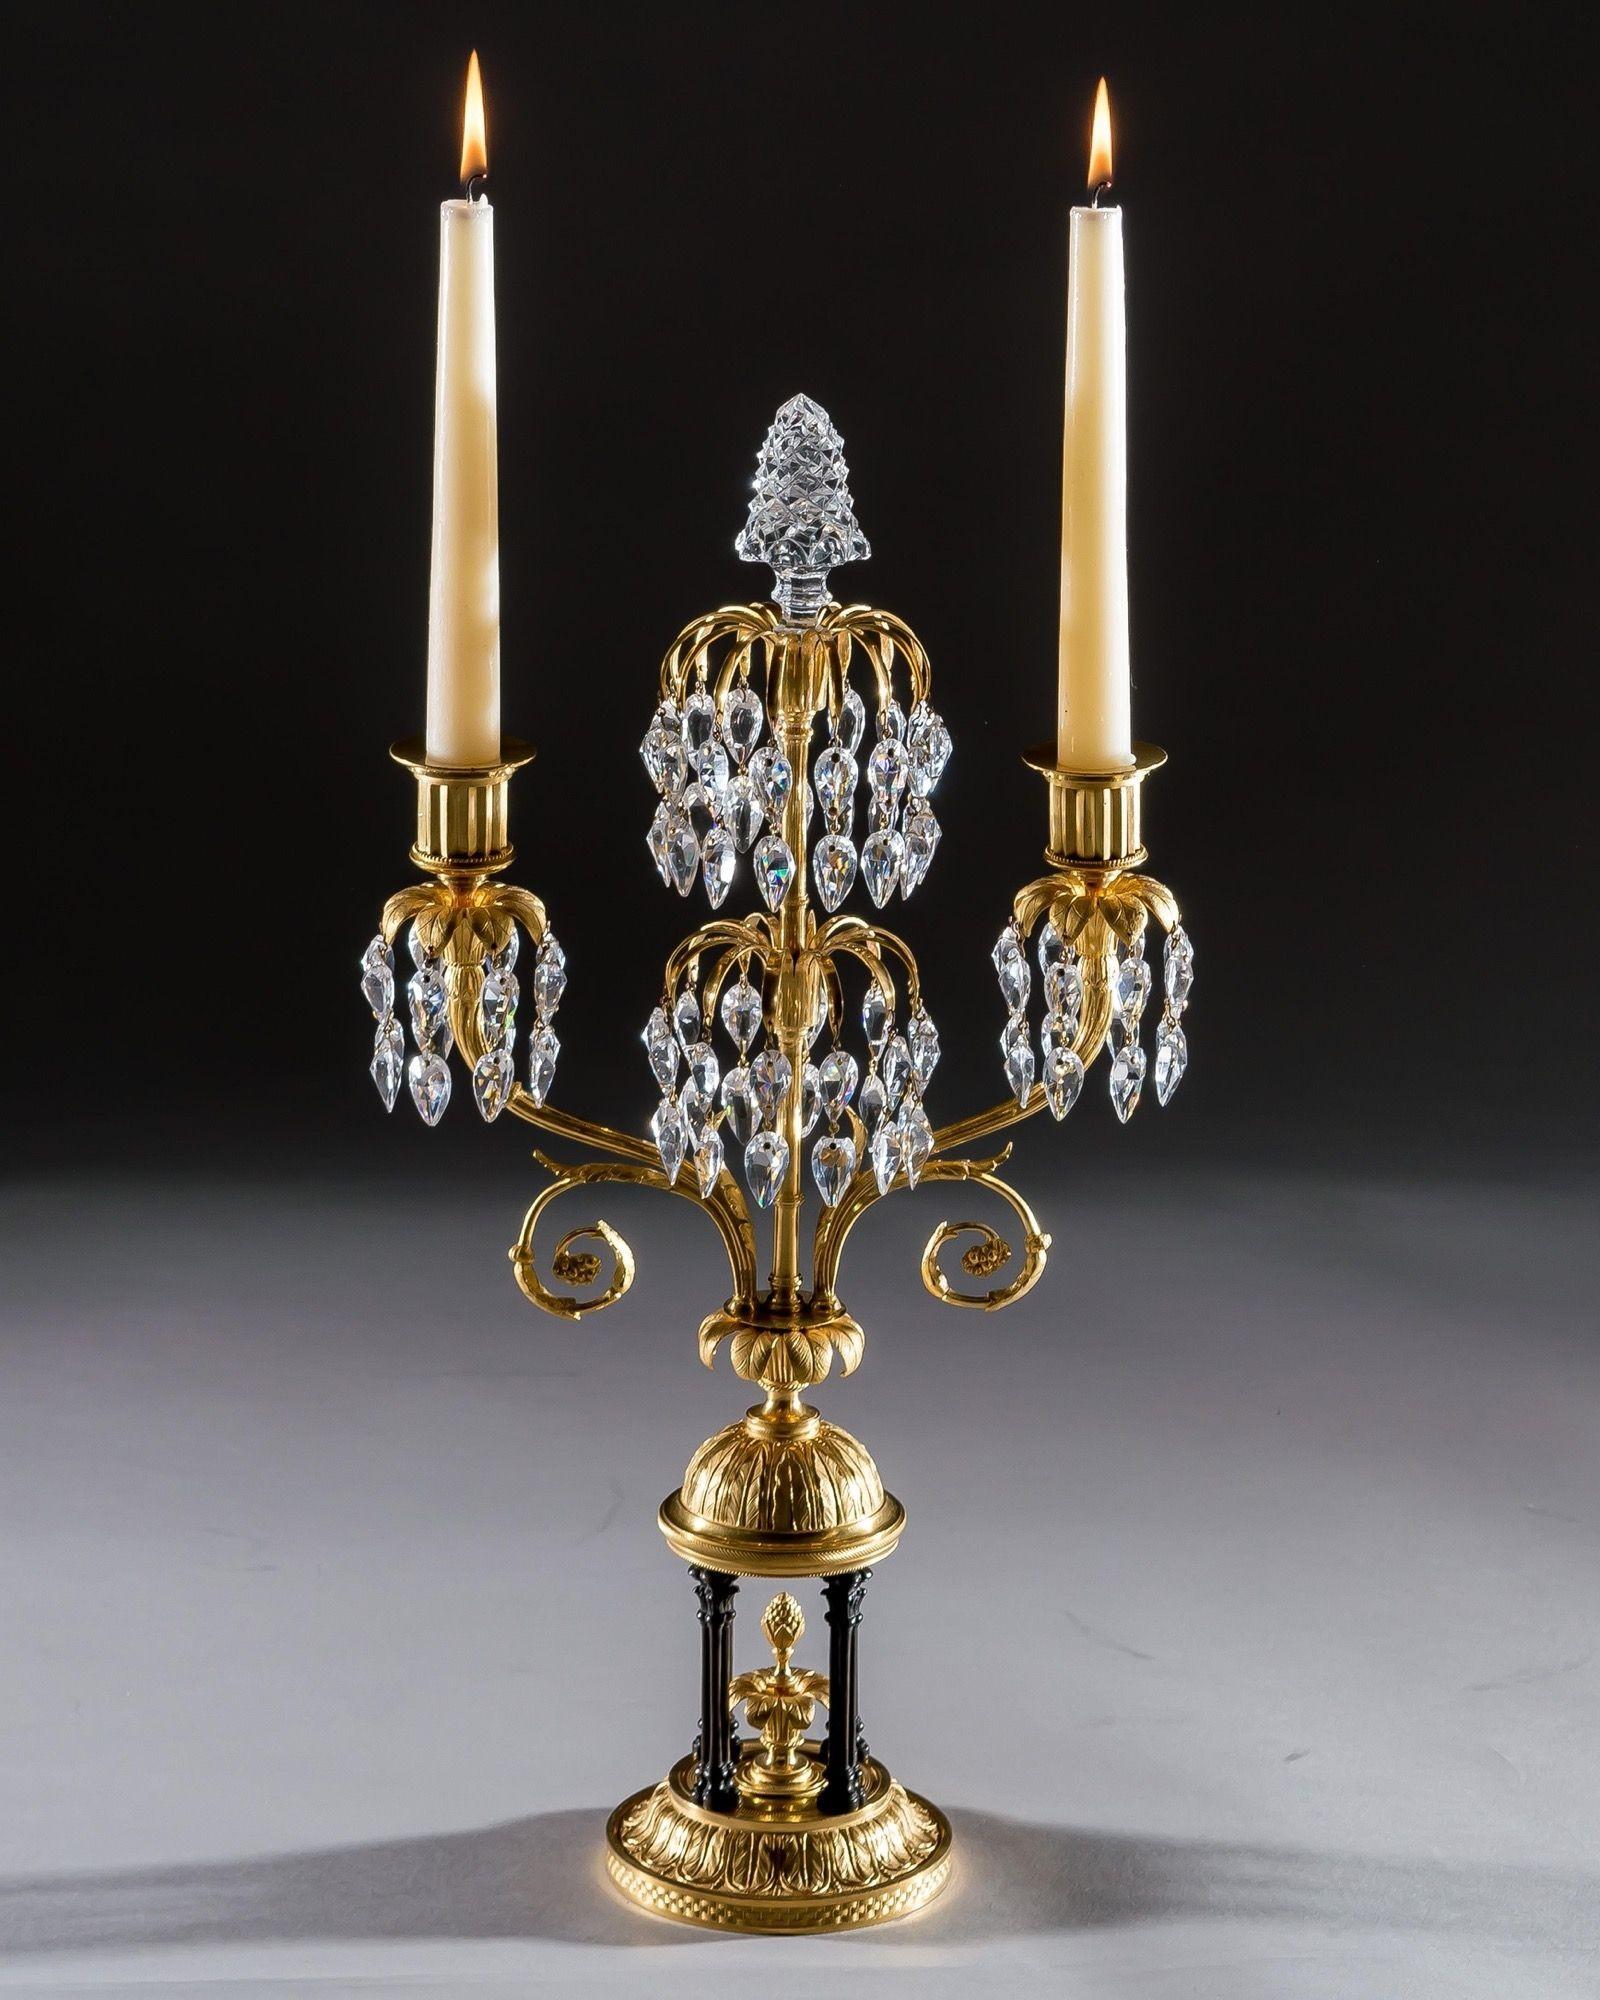 English An Exceptional Pair Of Regency Temple Candelabras